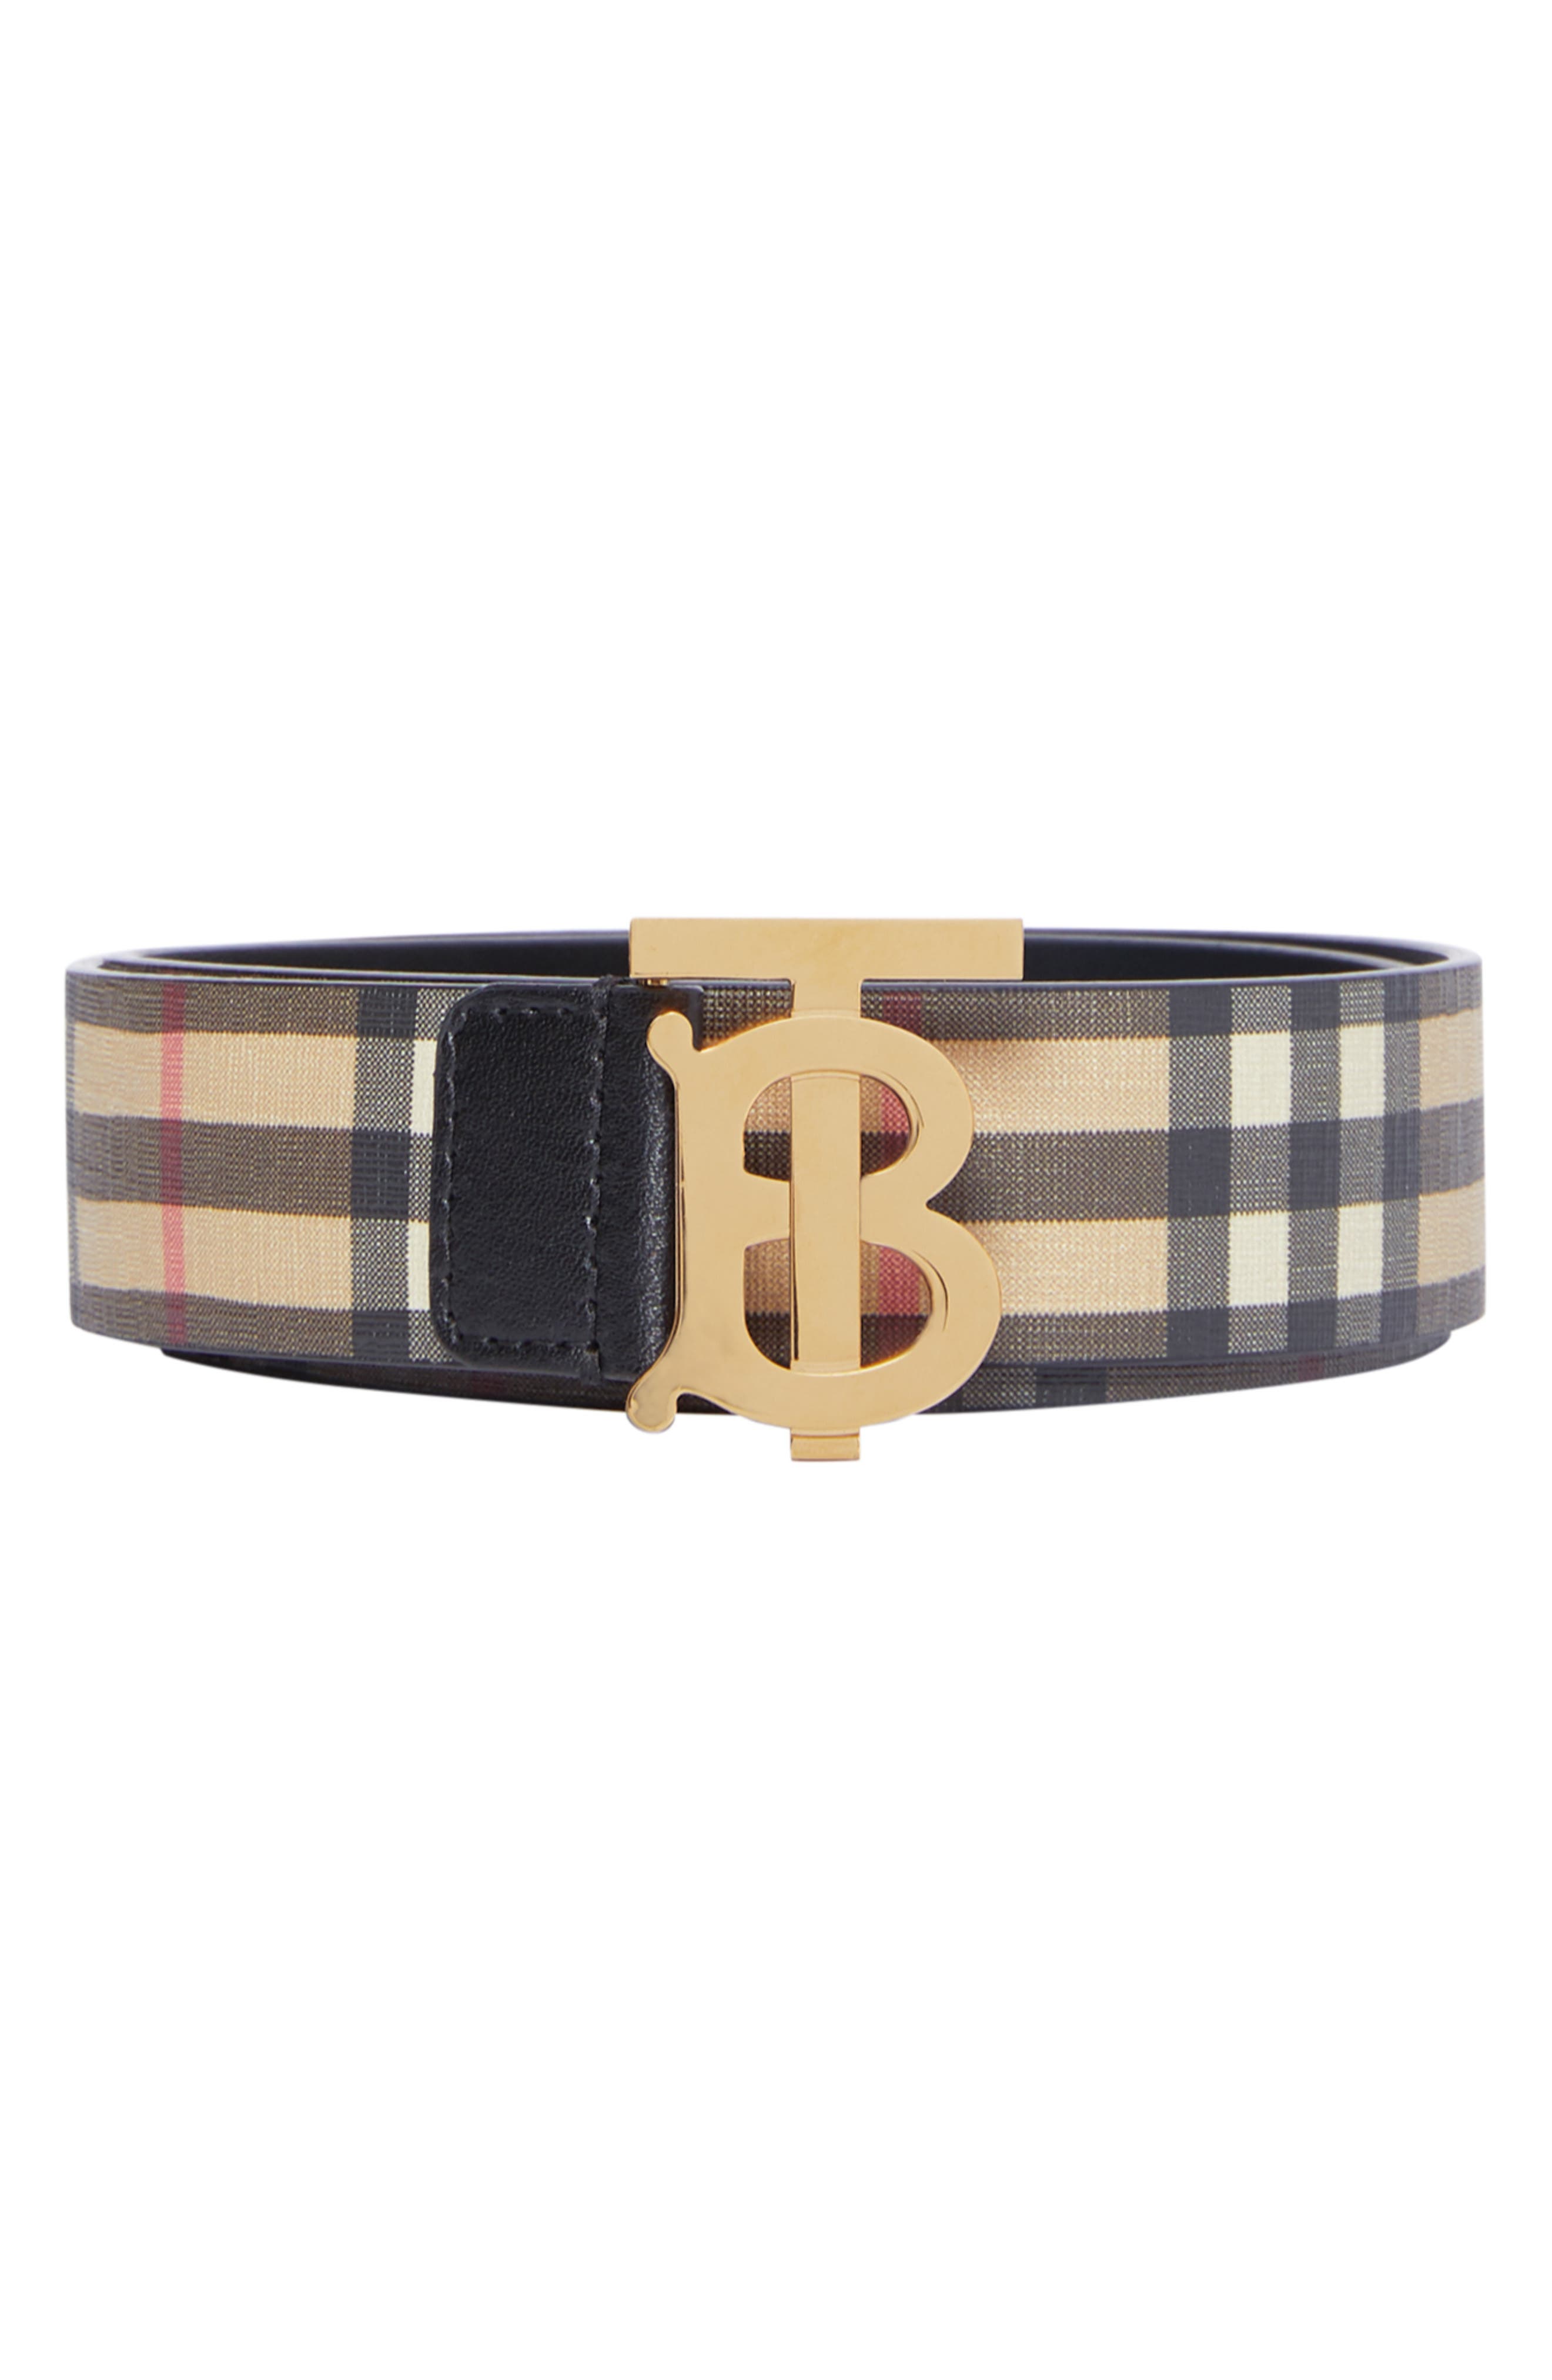 Women/'s Pink and Green Plaid Fabric Belt